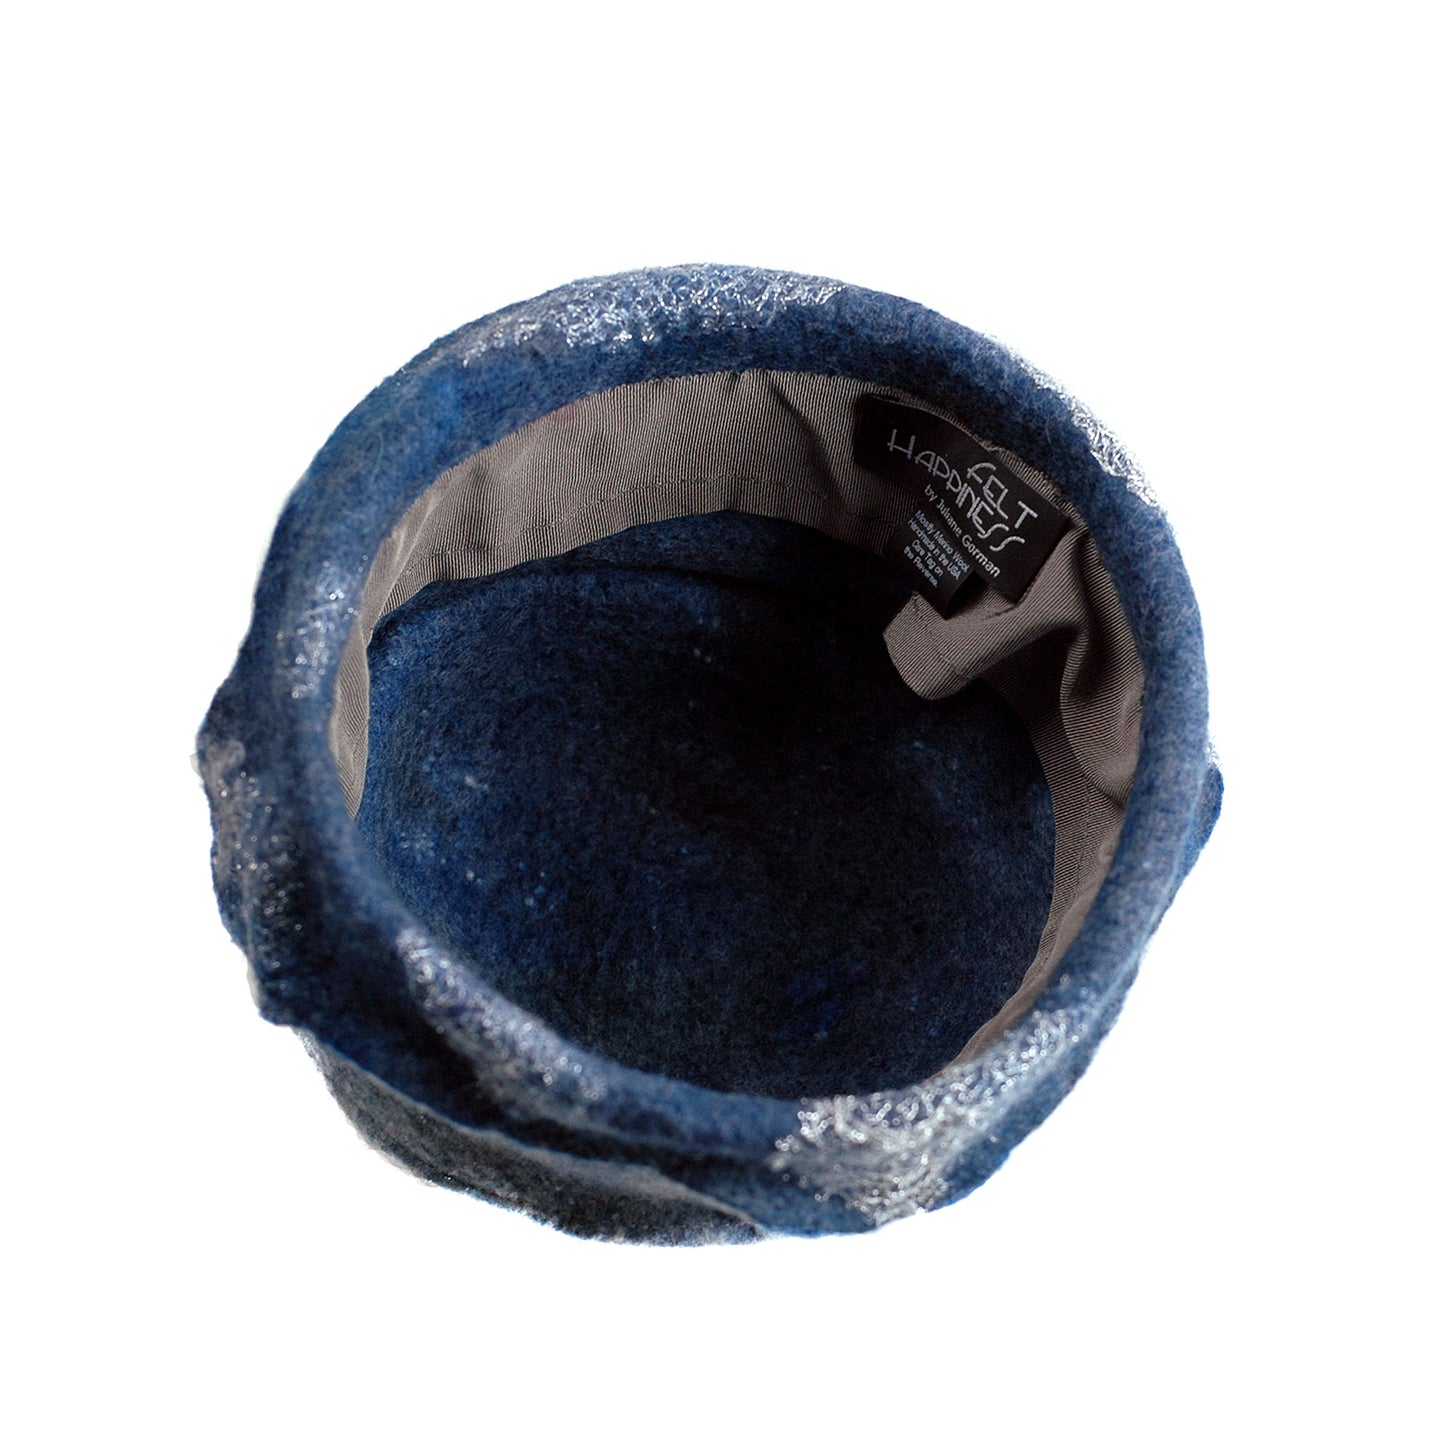 Indigo and White Felted Cloche Hat made with Superfine Merino Wool and Silver Lace - inside view